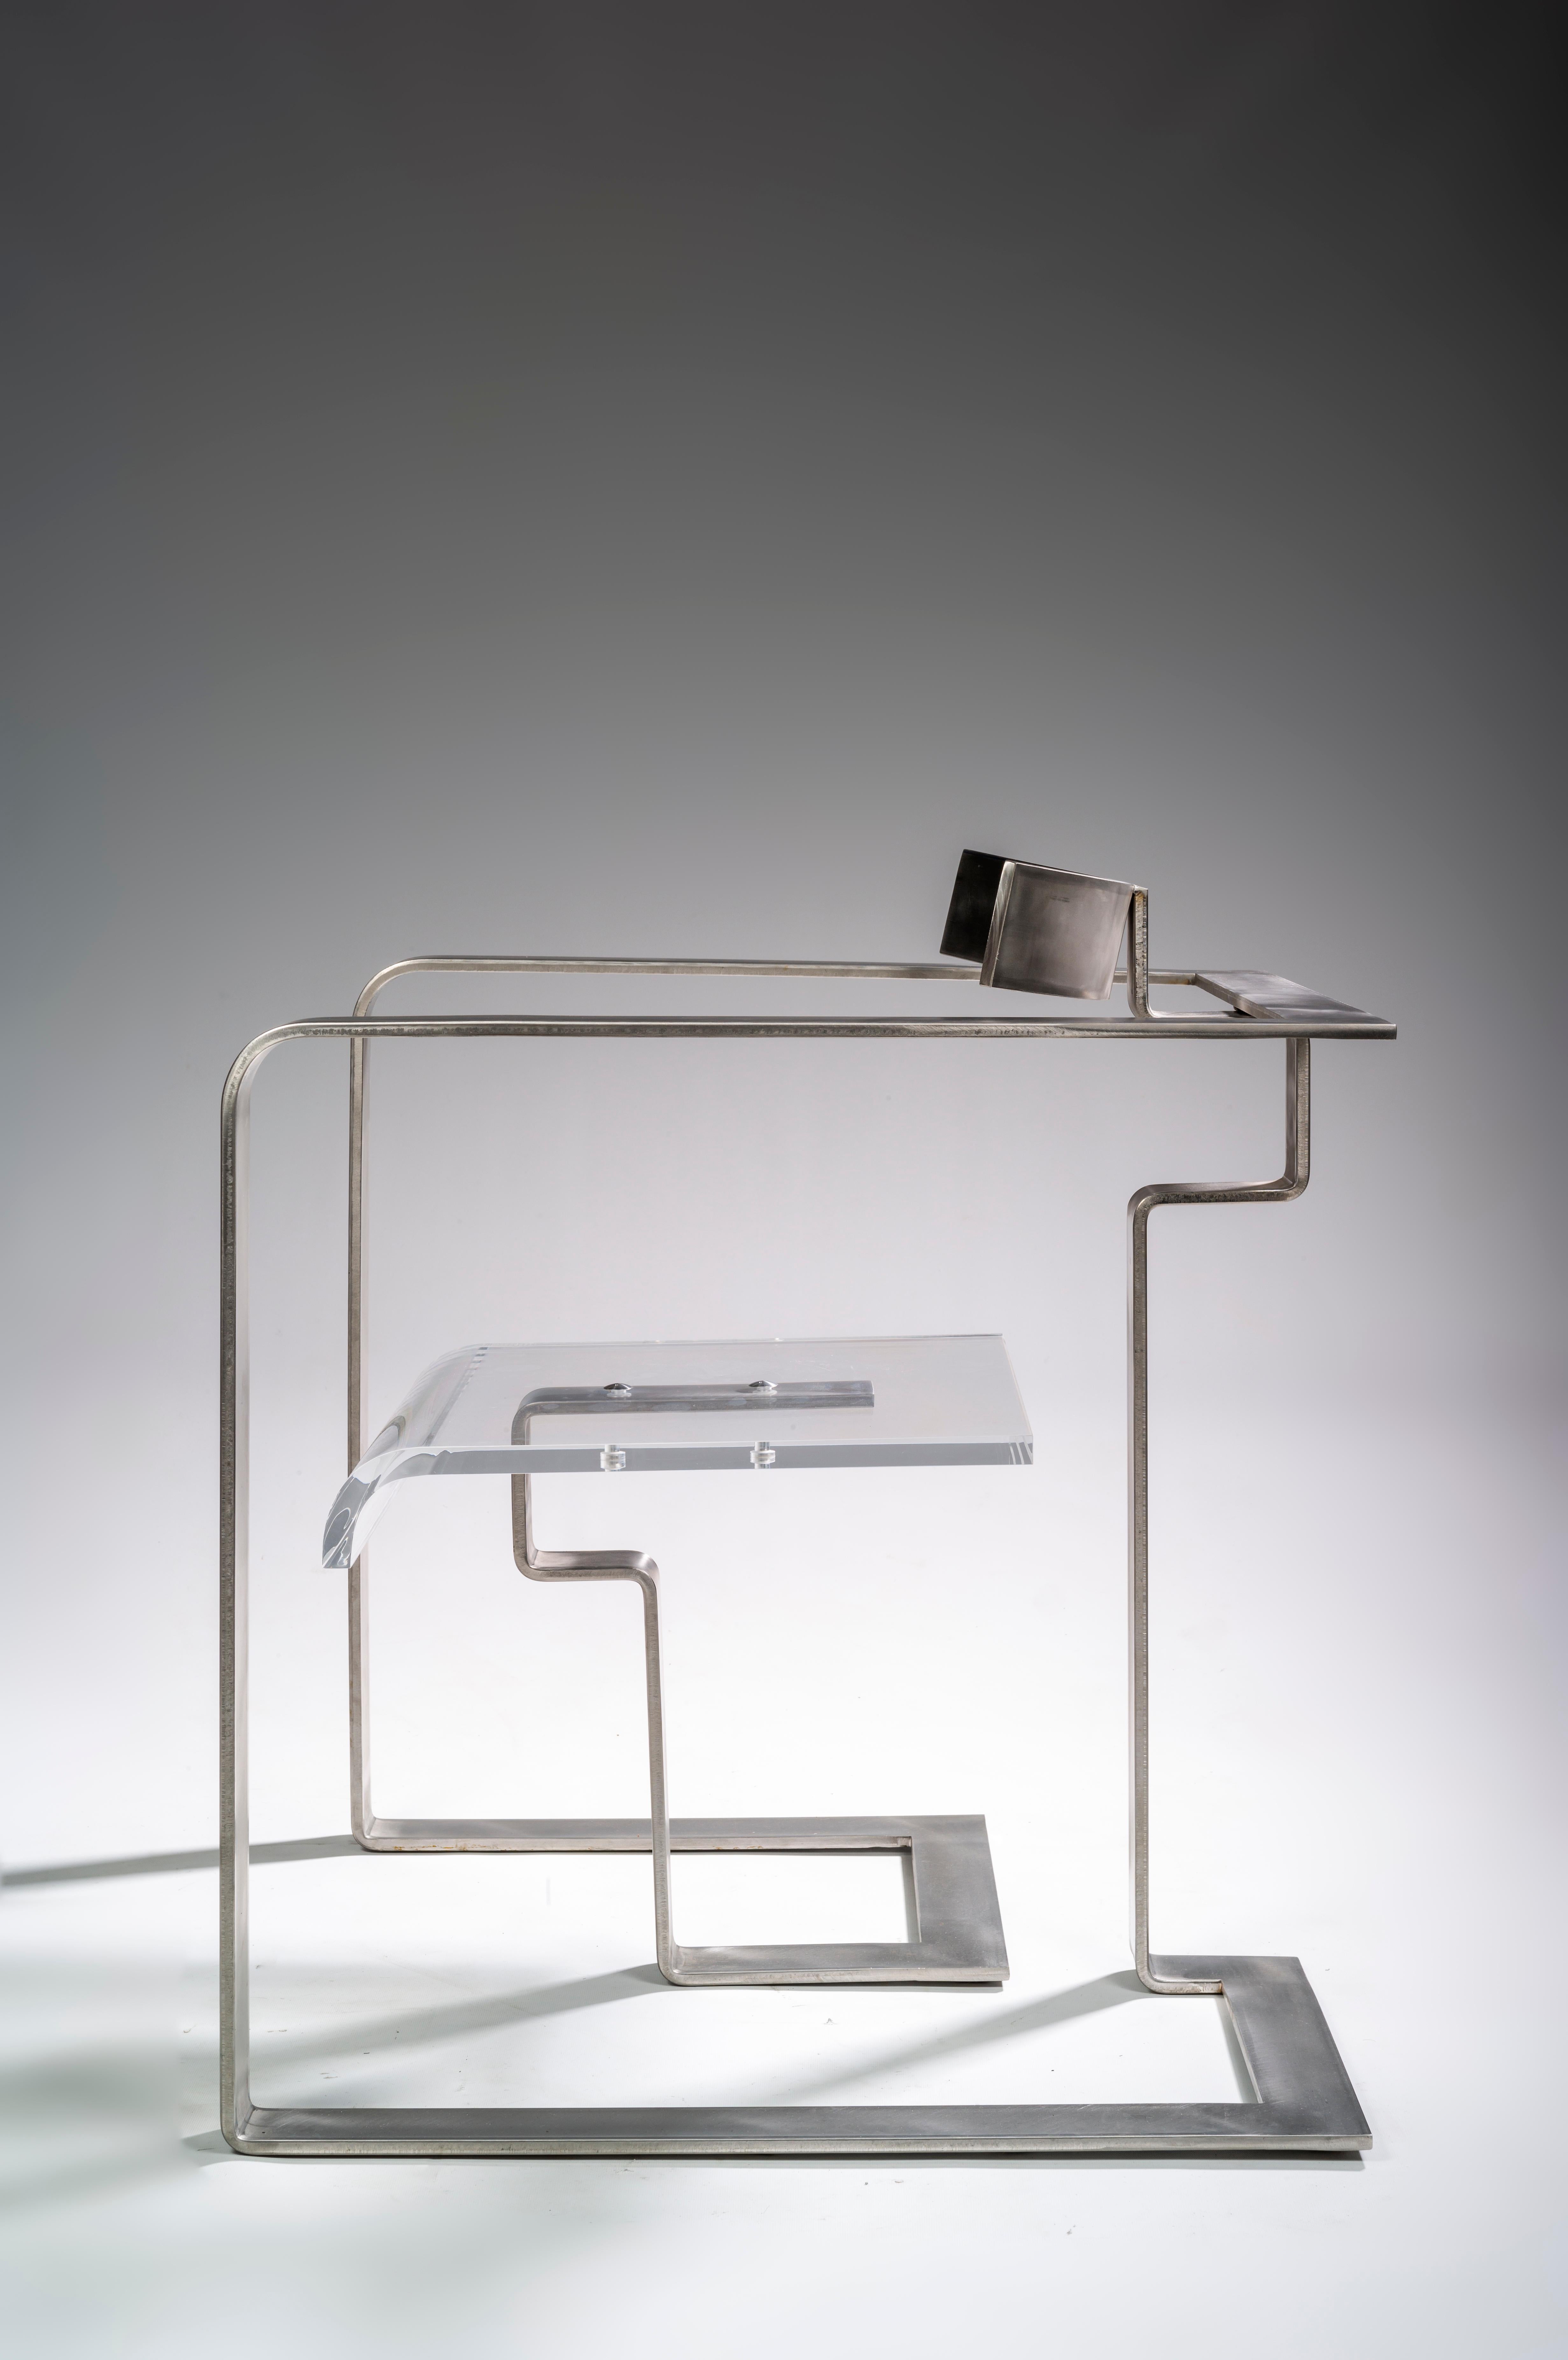 Gérard Lardeur, 1931-2002

Armchair, date of creation 1974, edition 2019.

Stainless steel and plexiglass.
Measures: Height 80 cm, width 70 cm, depth 70 cm.

Model made by the artist to six copies in 1974.
Edition 2019 limited to 20 numbered